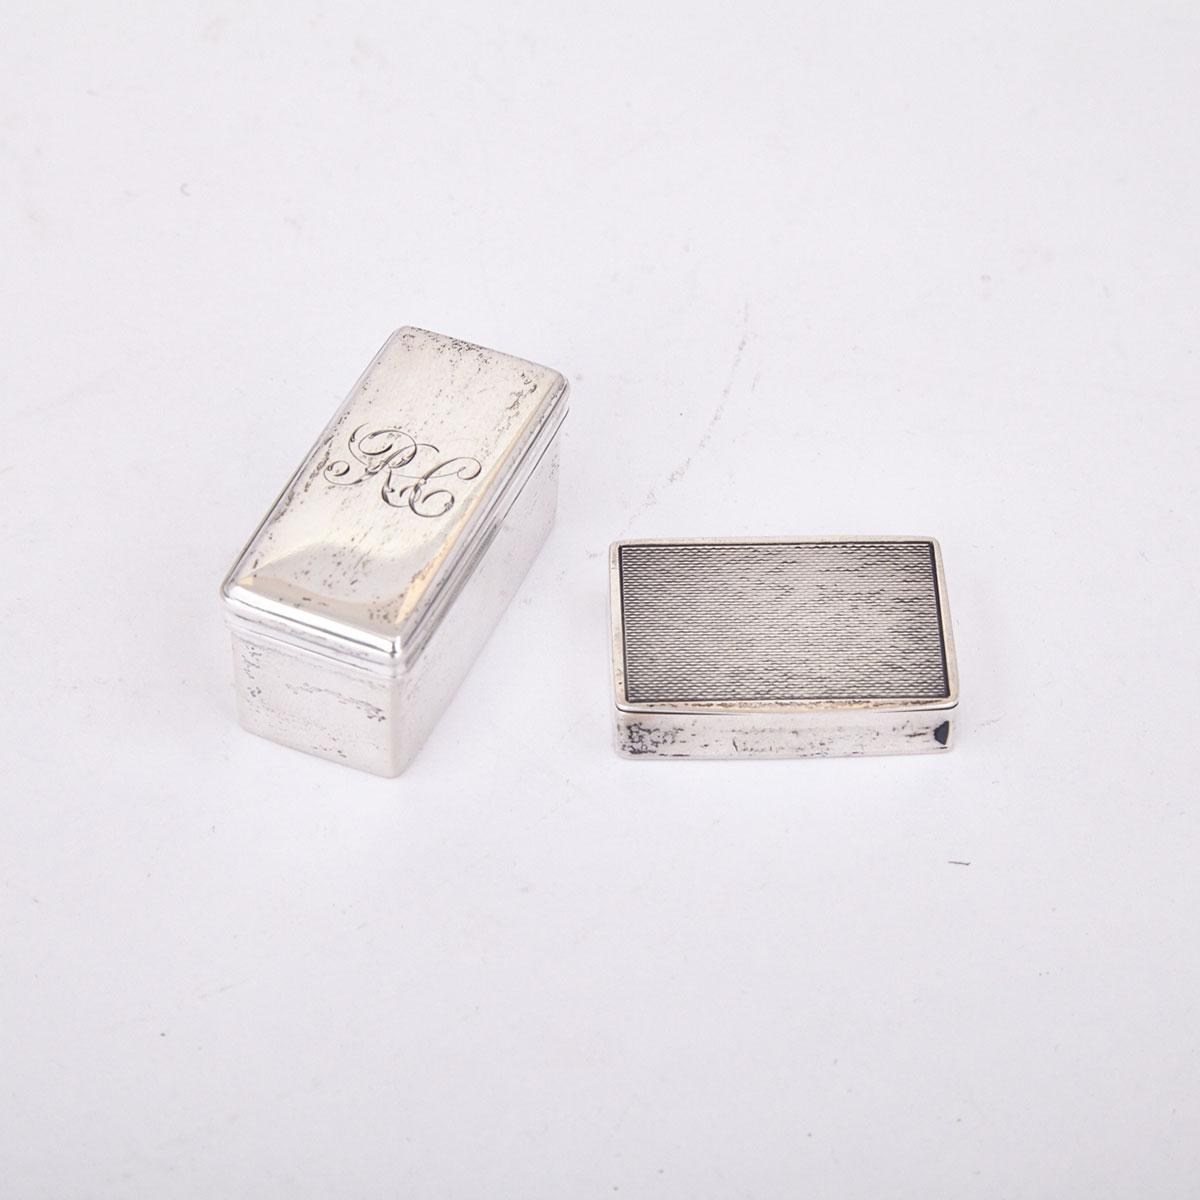 English Silver Rectangular Small Box, Asprey & Co., Birmingham, 1955 and Another, probably Continental, 19th century